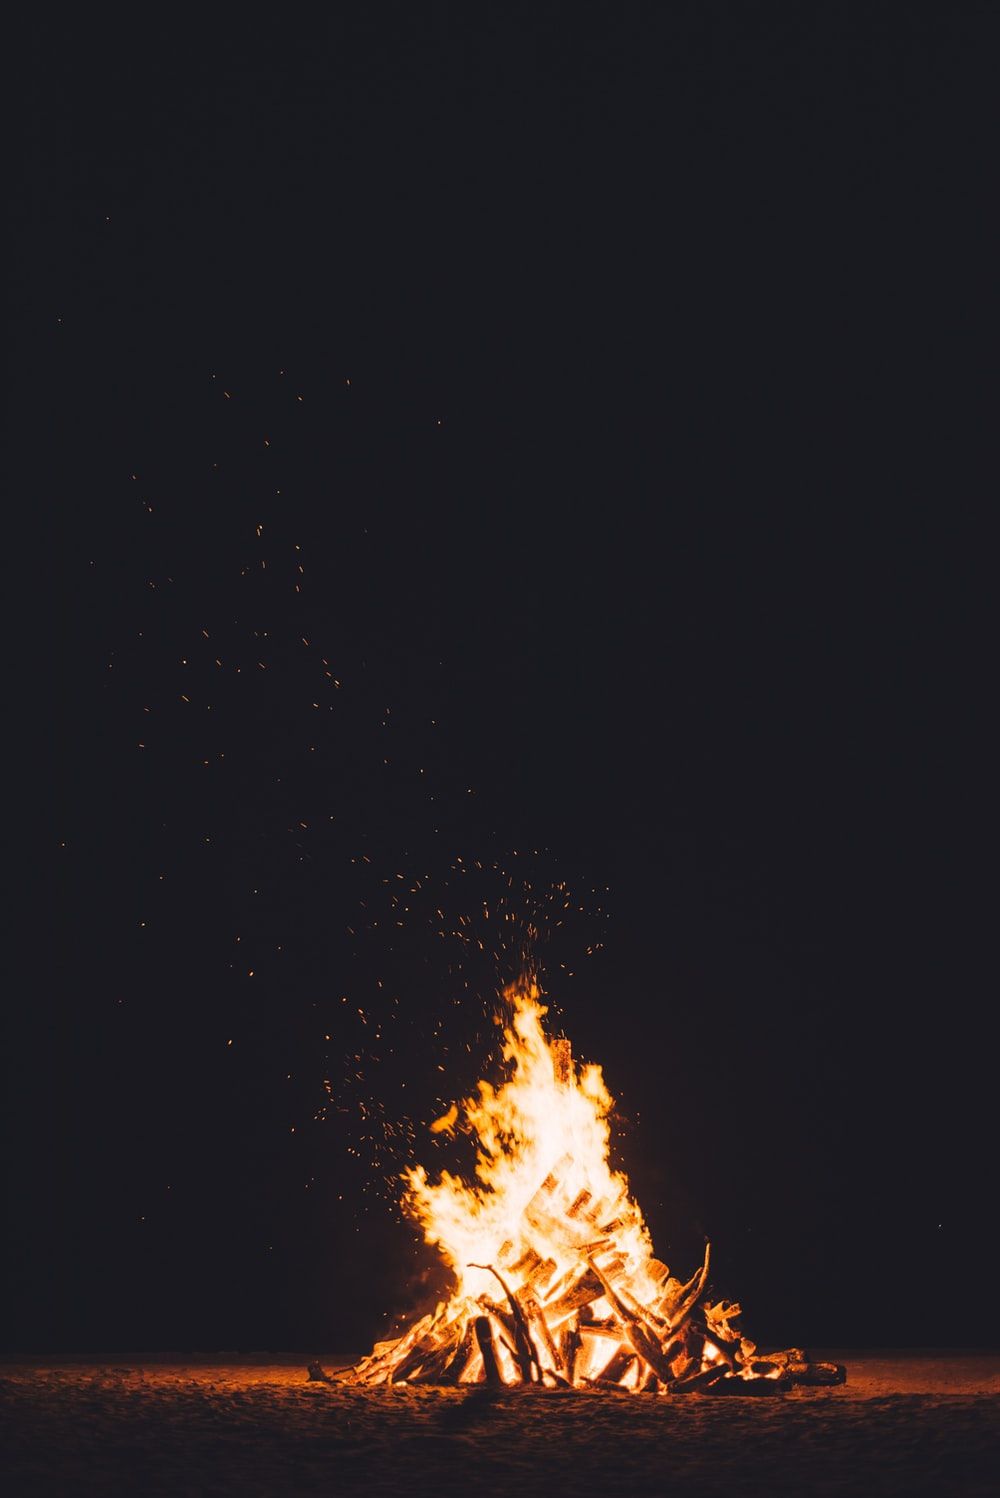 Fire Burn Picture. Download Free Image